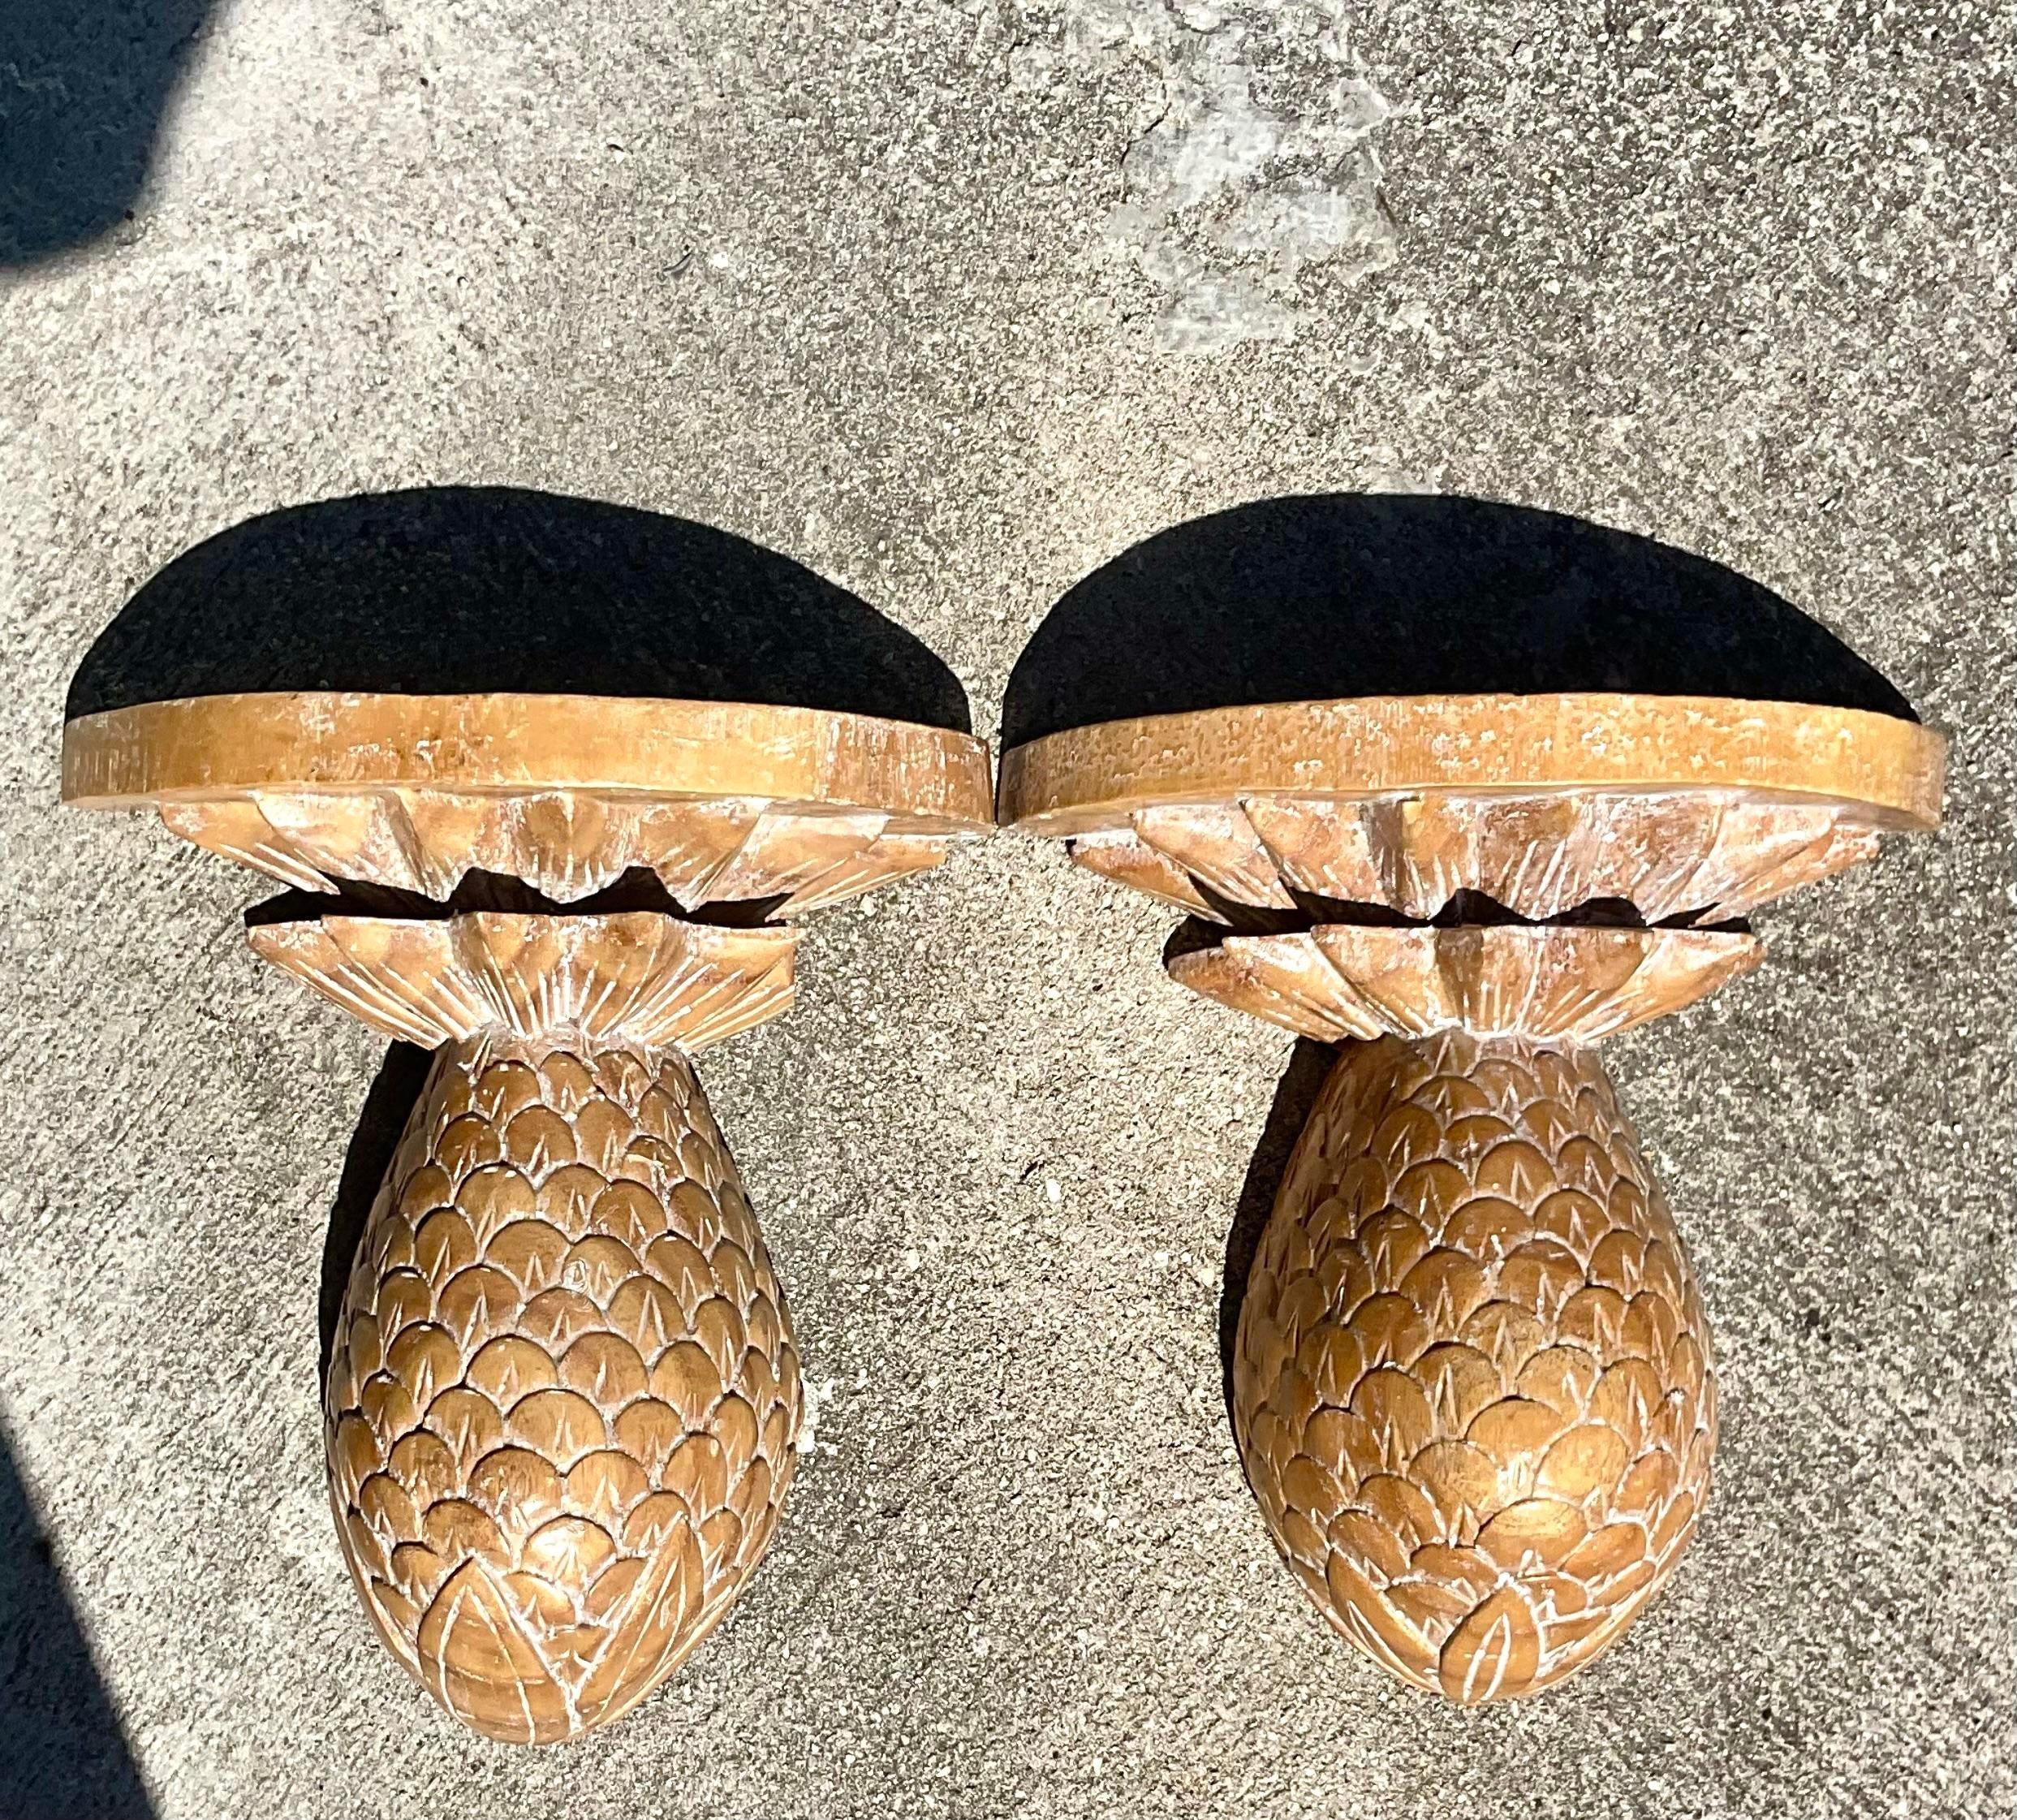 Vintage Regency Washed Wood Pineapple Brackets - a Pair In Good Condition For Sale In west palm beach, FL